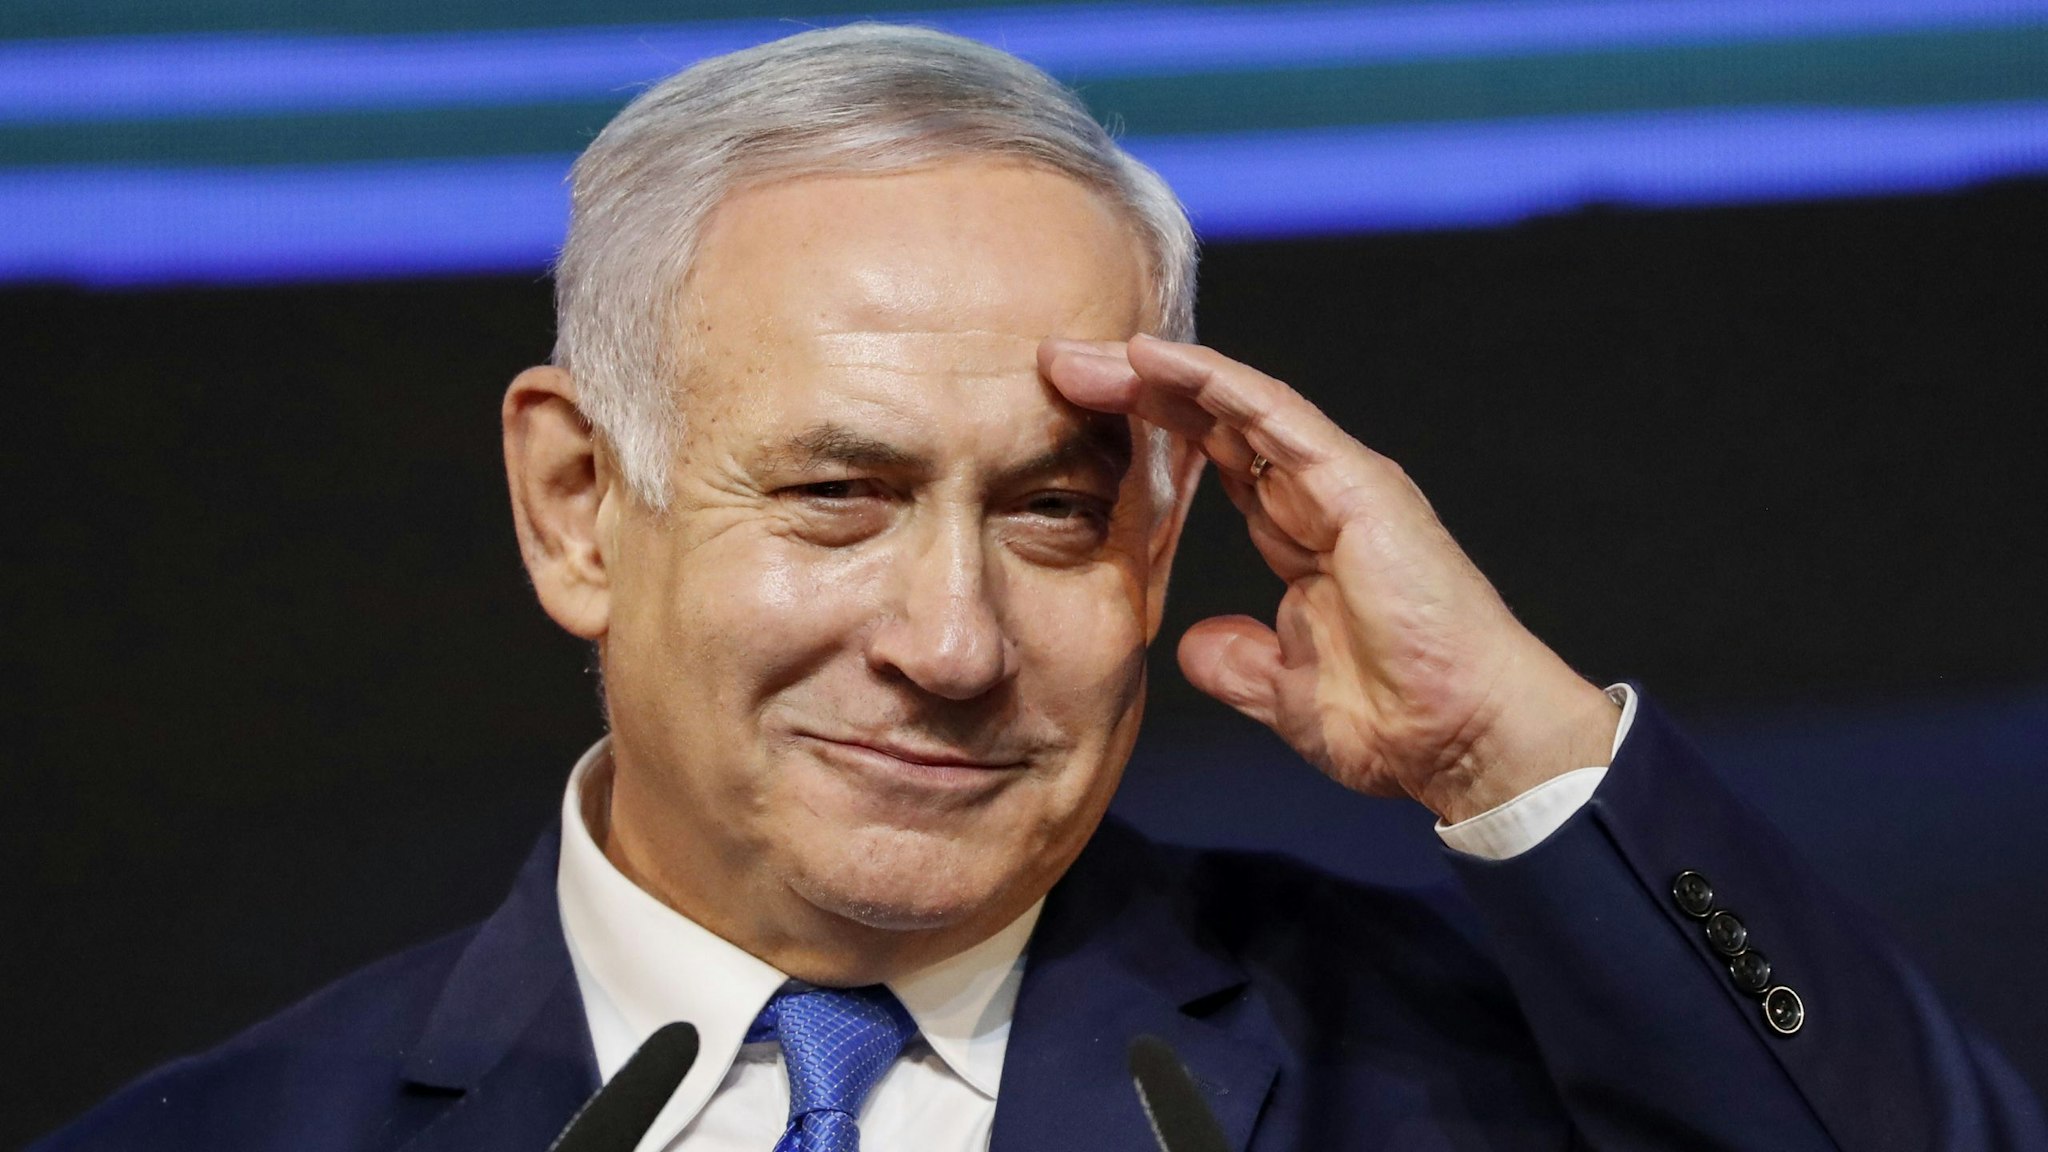 Israeli Prime Minister Benjamin Netanyahu gestures as he addresses supporters at his Likud Party headquarters in the Israeli coastal city of Tel Aviv on election night early on April 10, 2019.